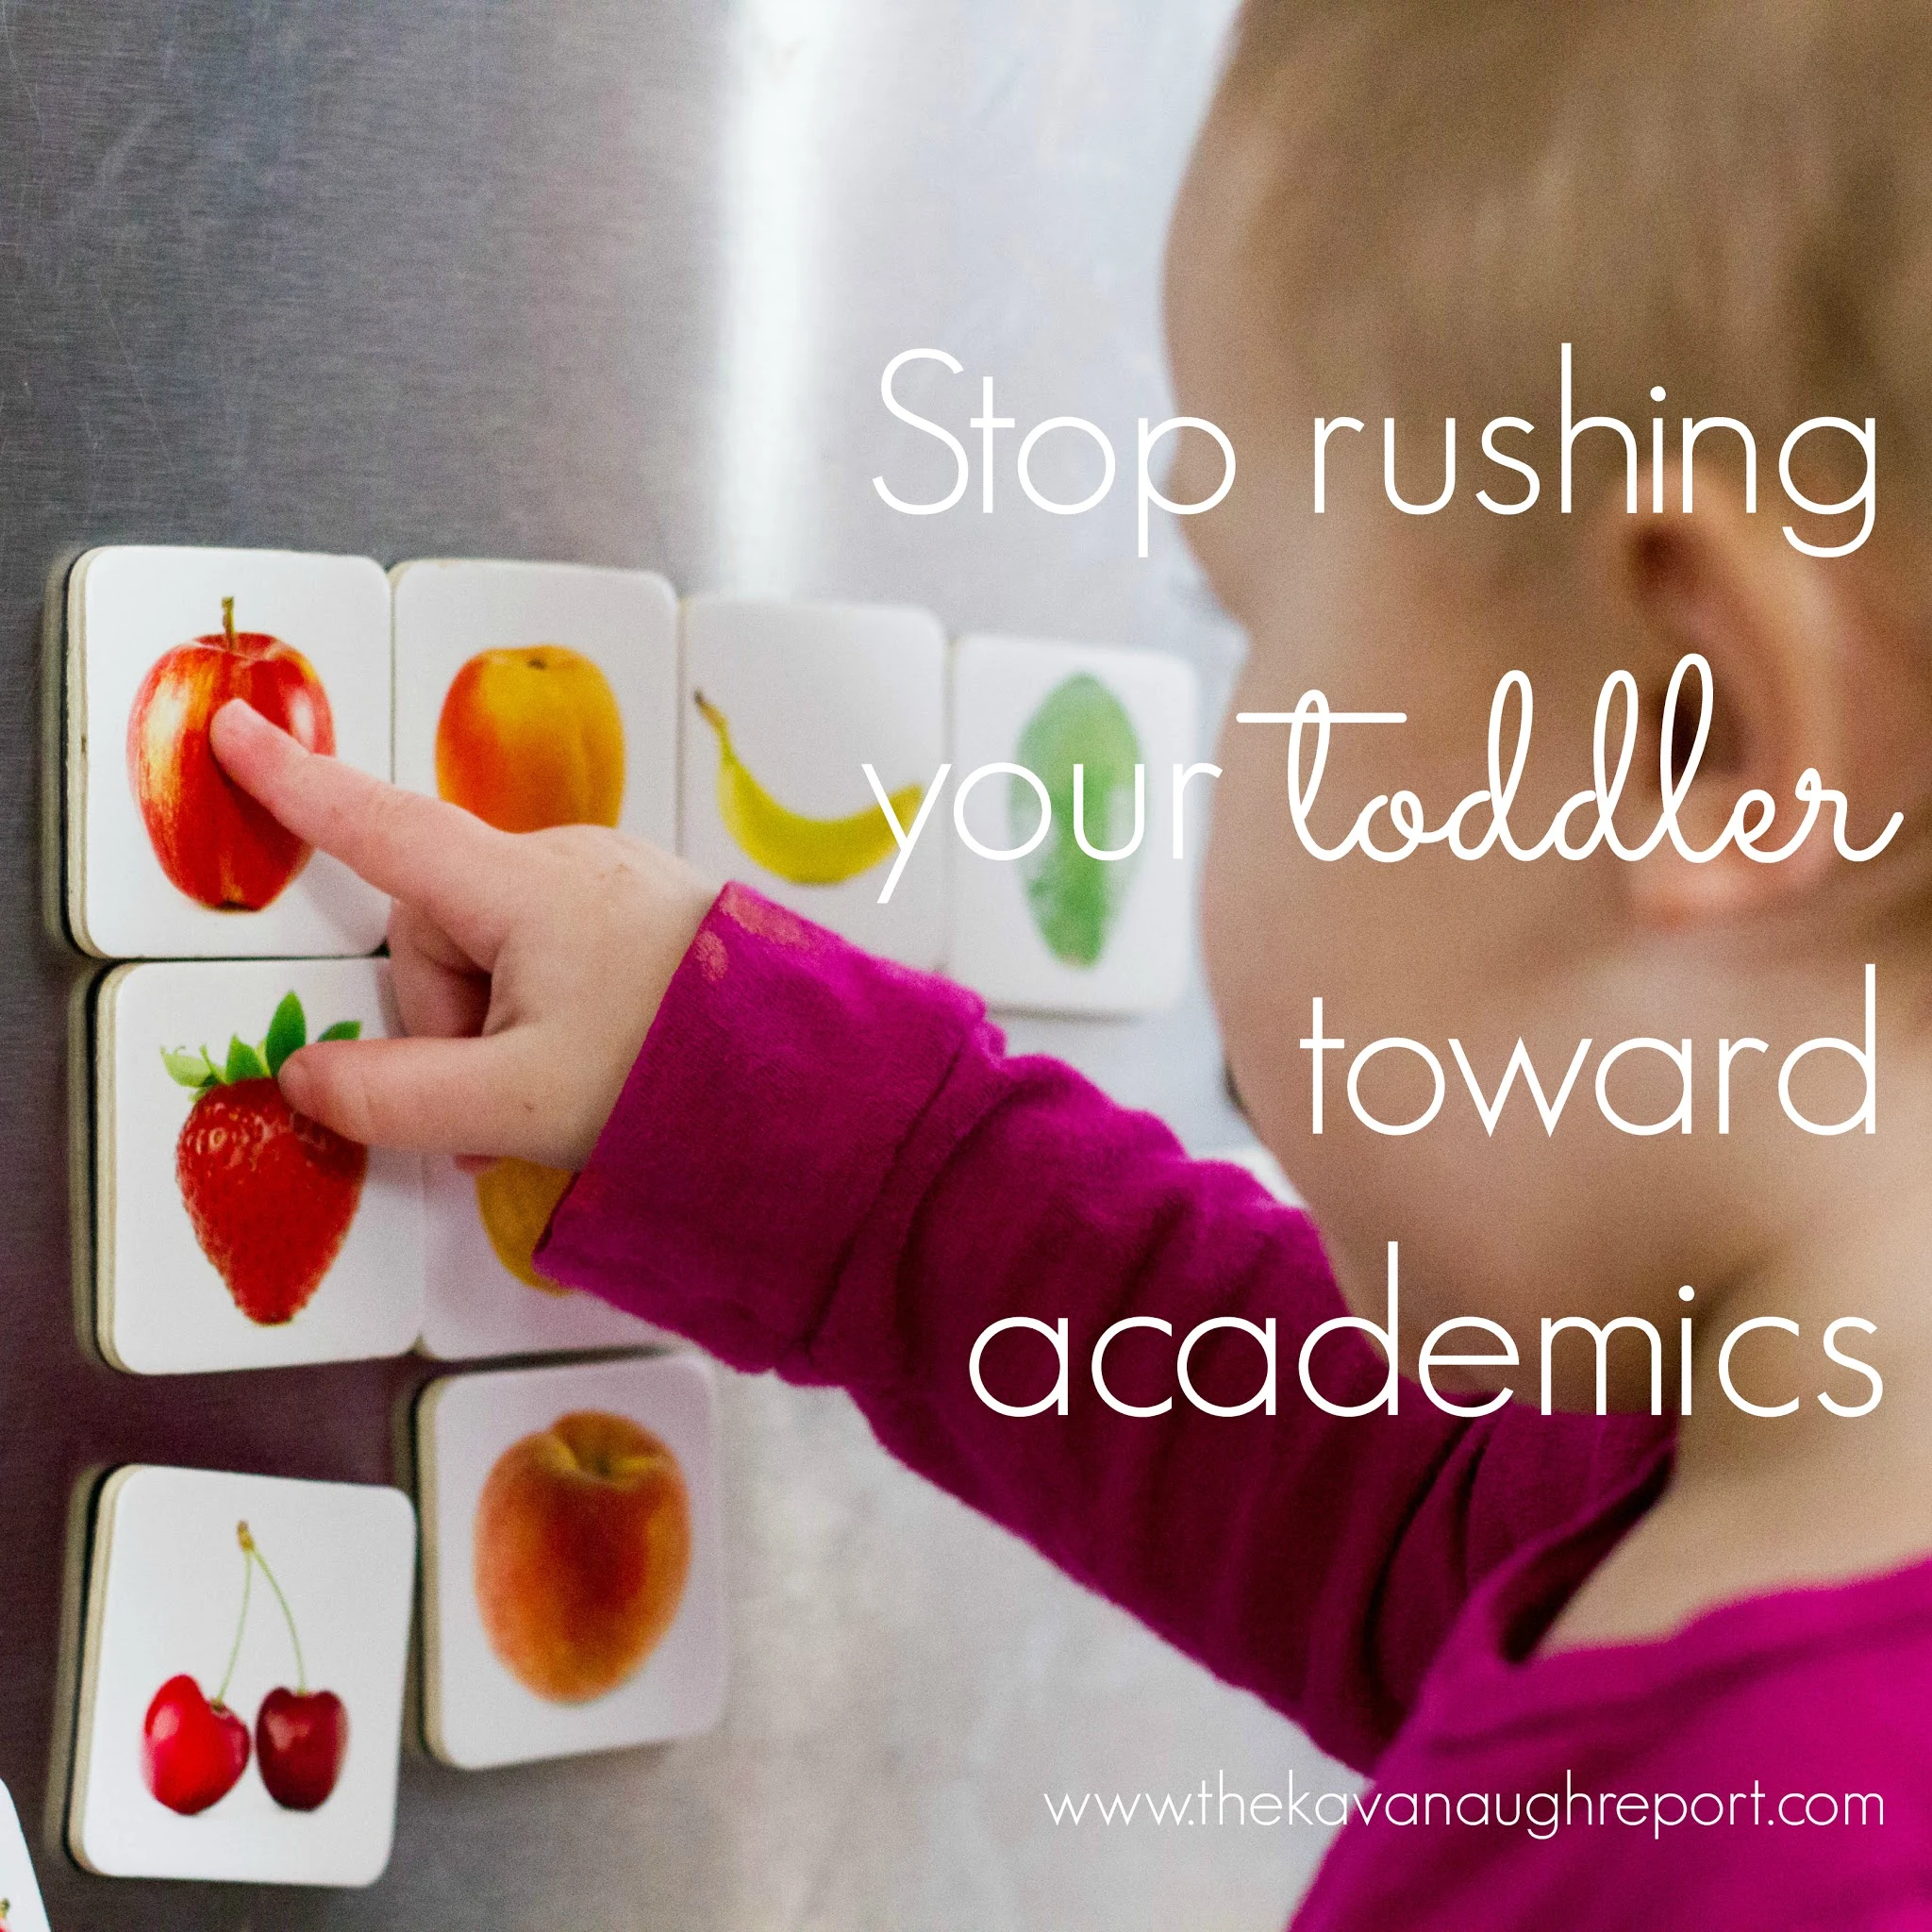 In our fast paced world, toddler's are being forced to learn new academic concepts faster and faster. Instead of pushing toddlers, this Montessori answer is to slow down, stop rushing toddlers and let them be little.